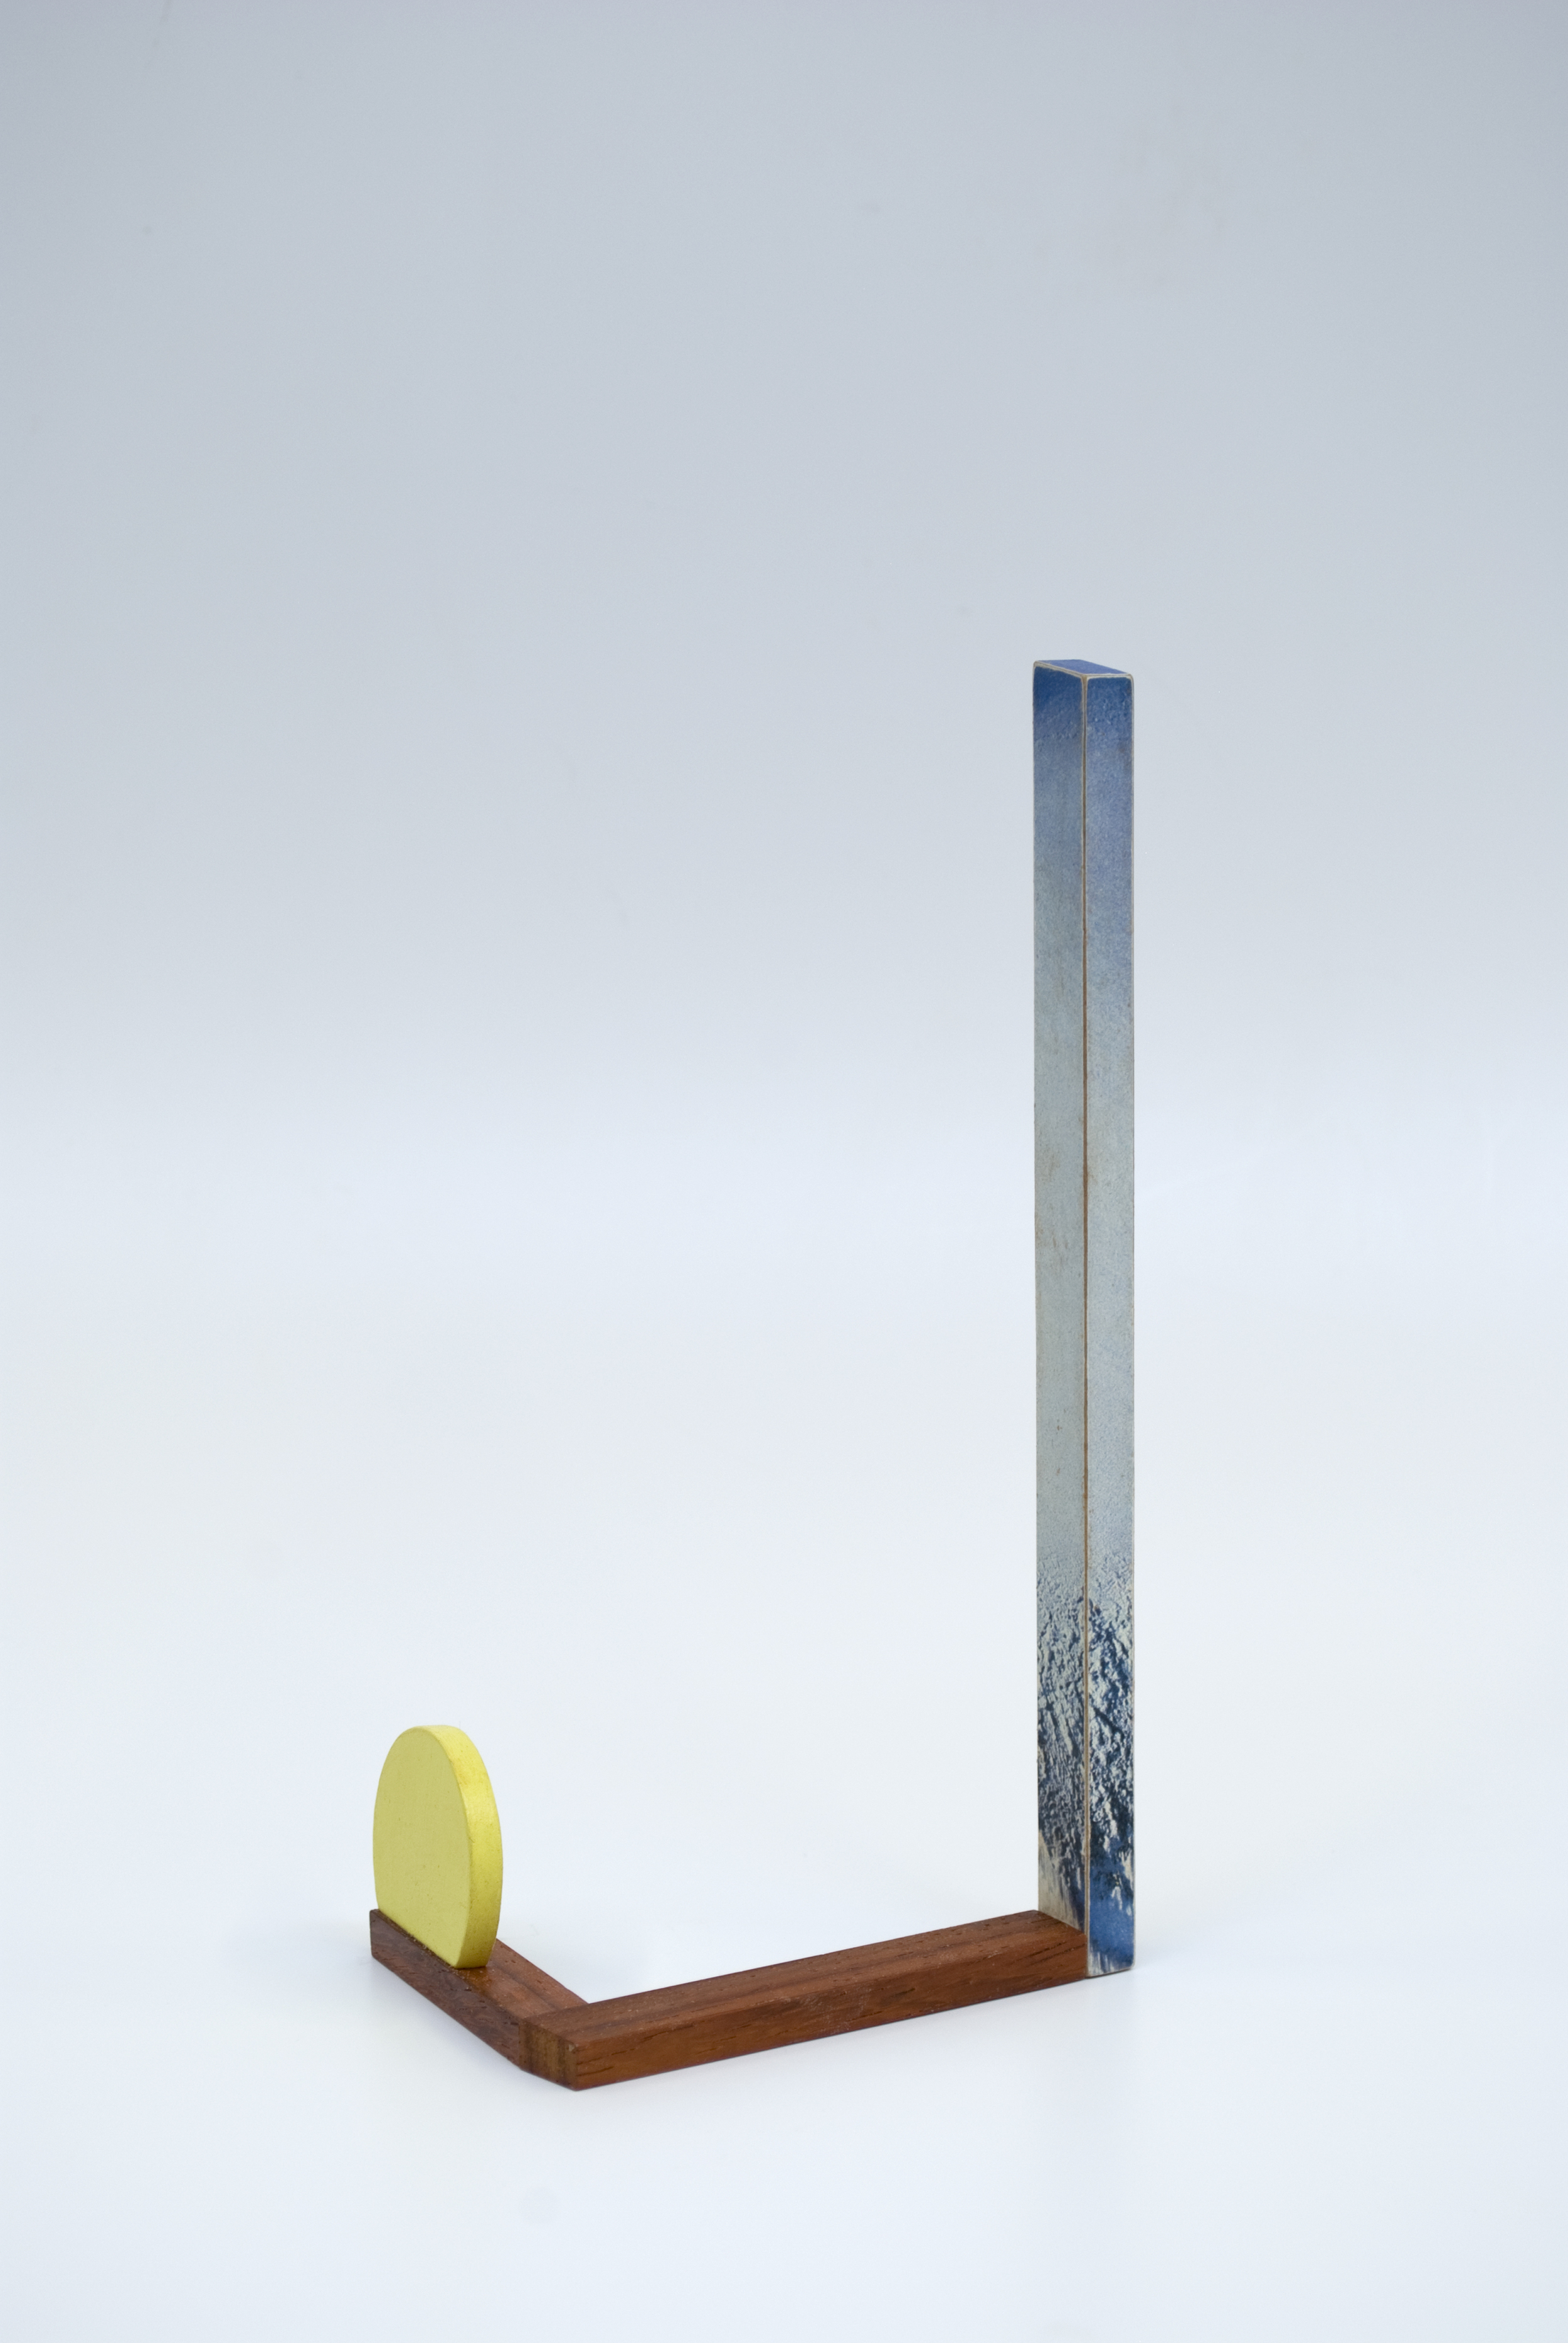   Maquette 7 , 2015  7.5 x 3.5 x 2 inches  Wood, paint, found image 